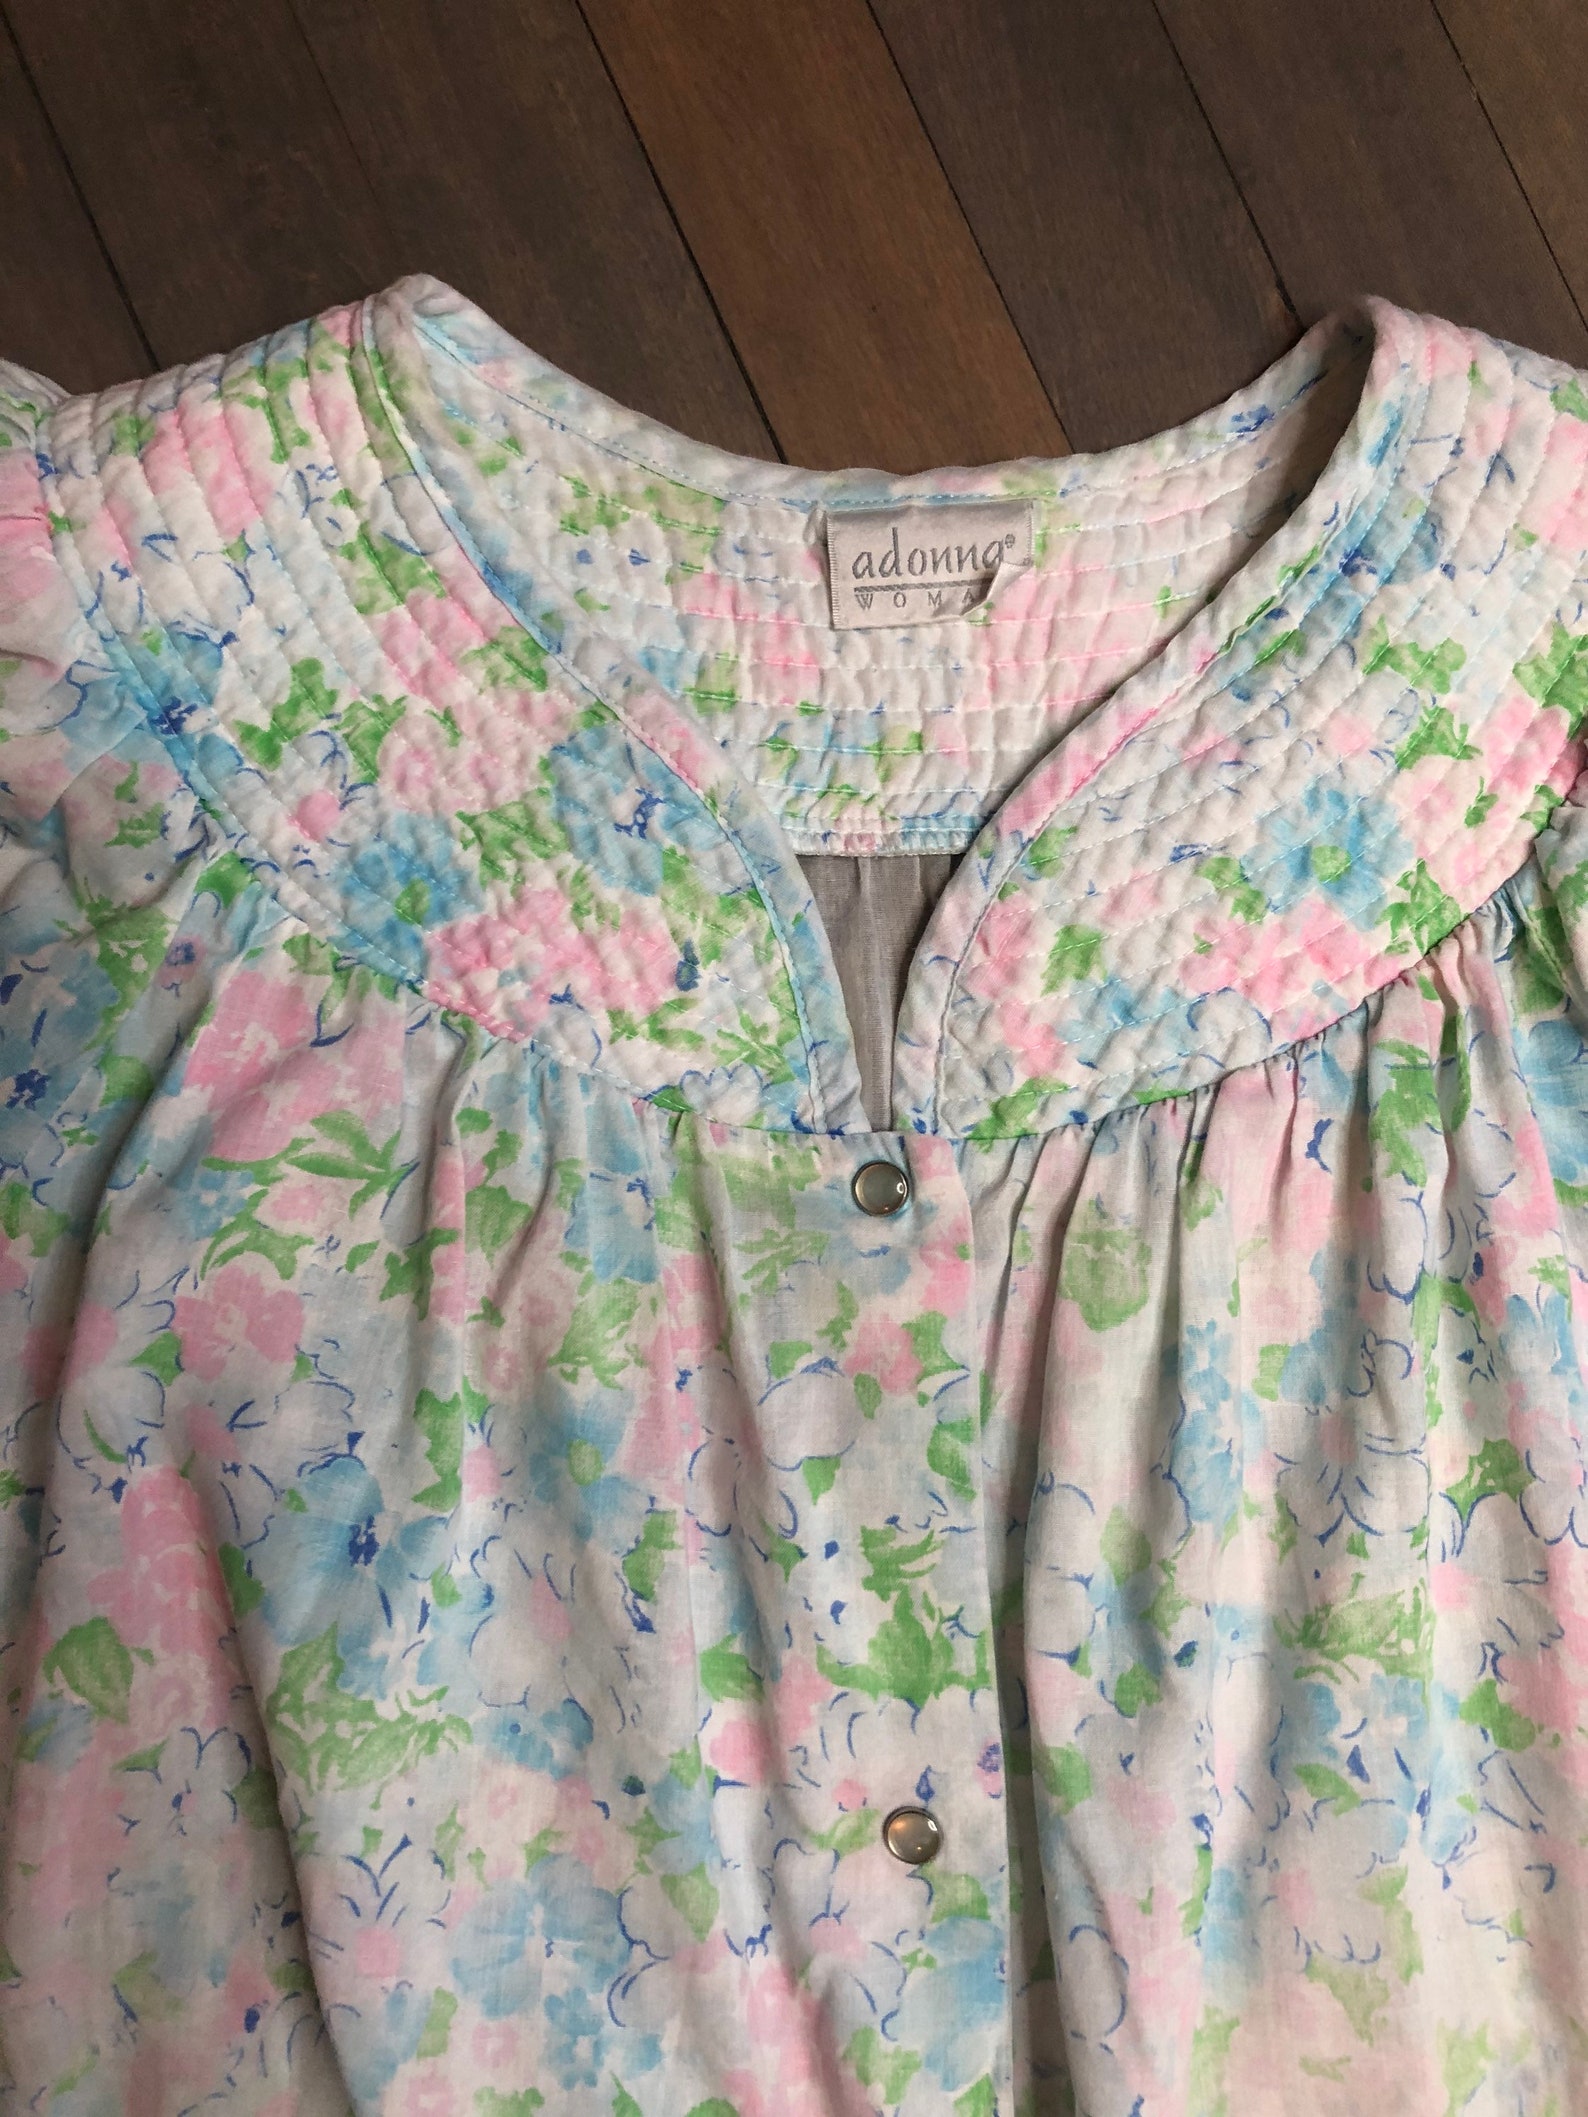 Vintage floral nightgown with pearl snaps down front. pink | Etsy